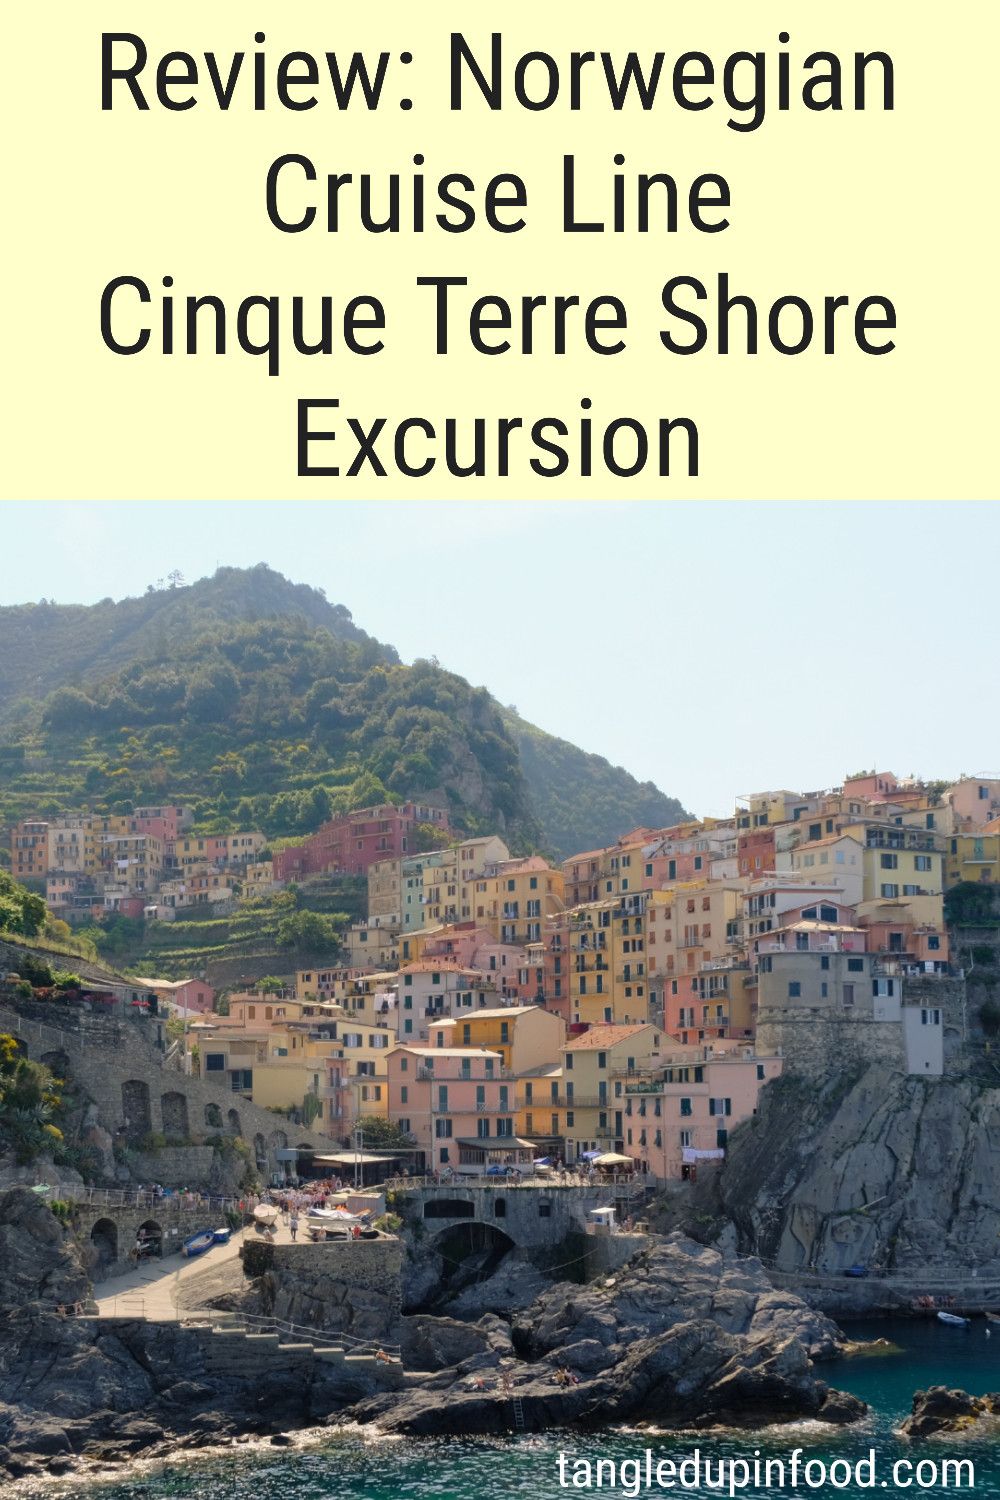 Photo of seaside village with text reading "Review: Norwegian Cruise Line Cinque Terre Shore Excursion"